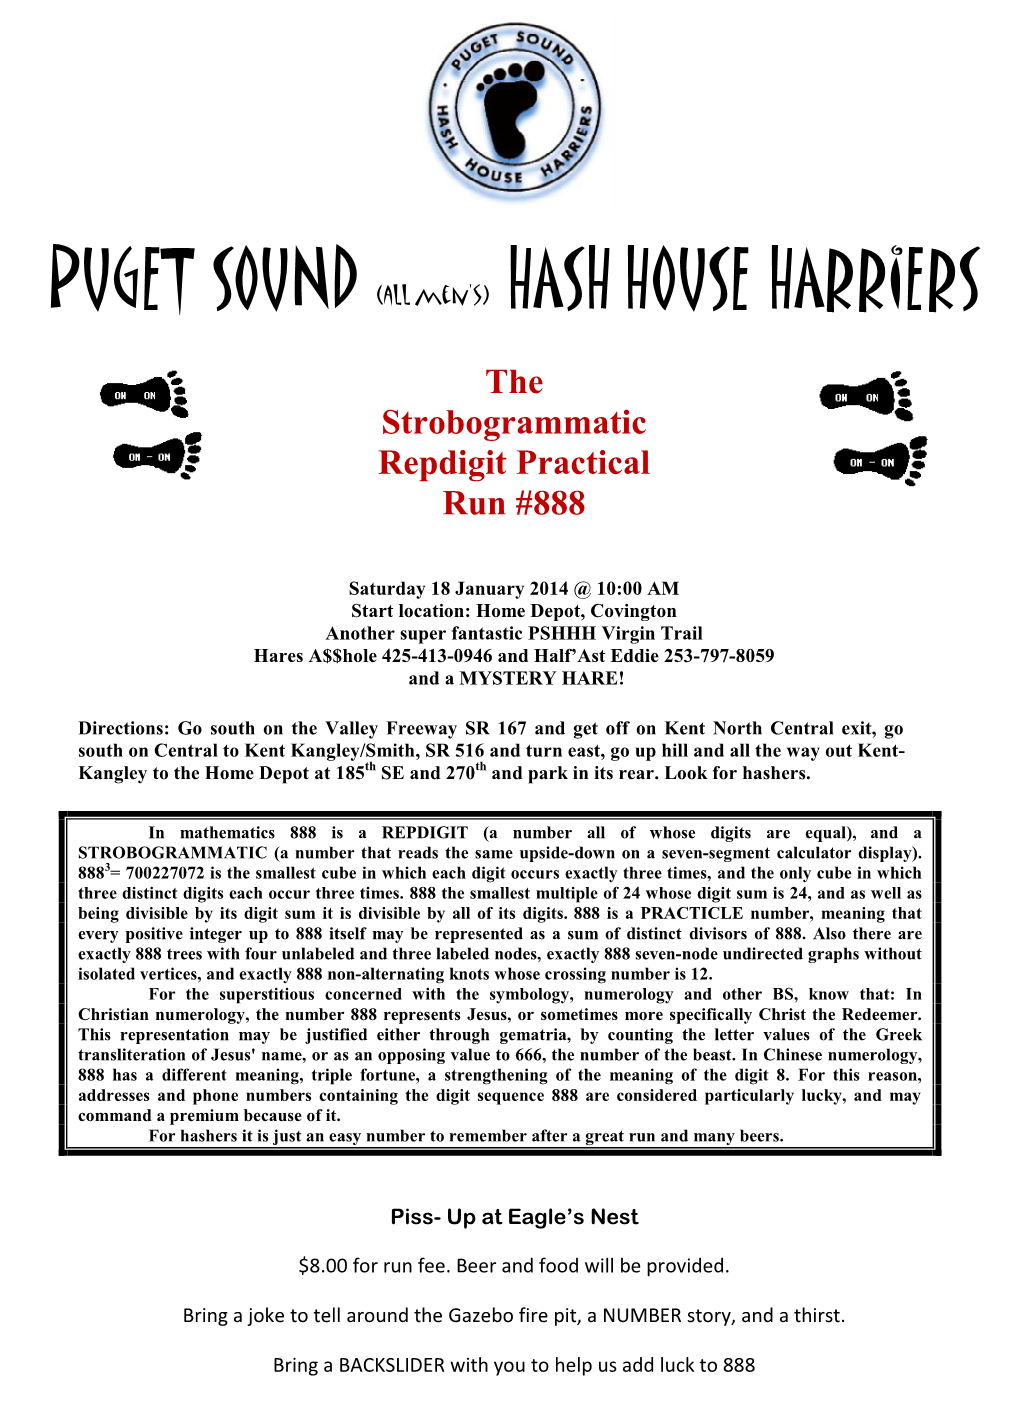 PUGET SOUND (All Men's) HASH HOUSE Harriers